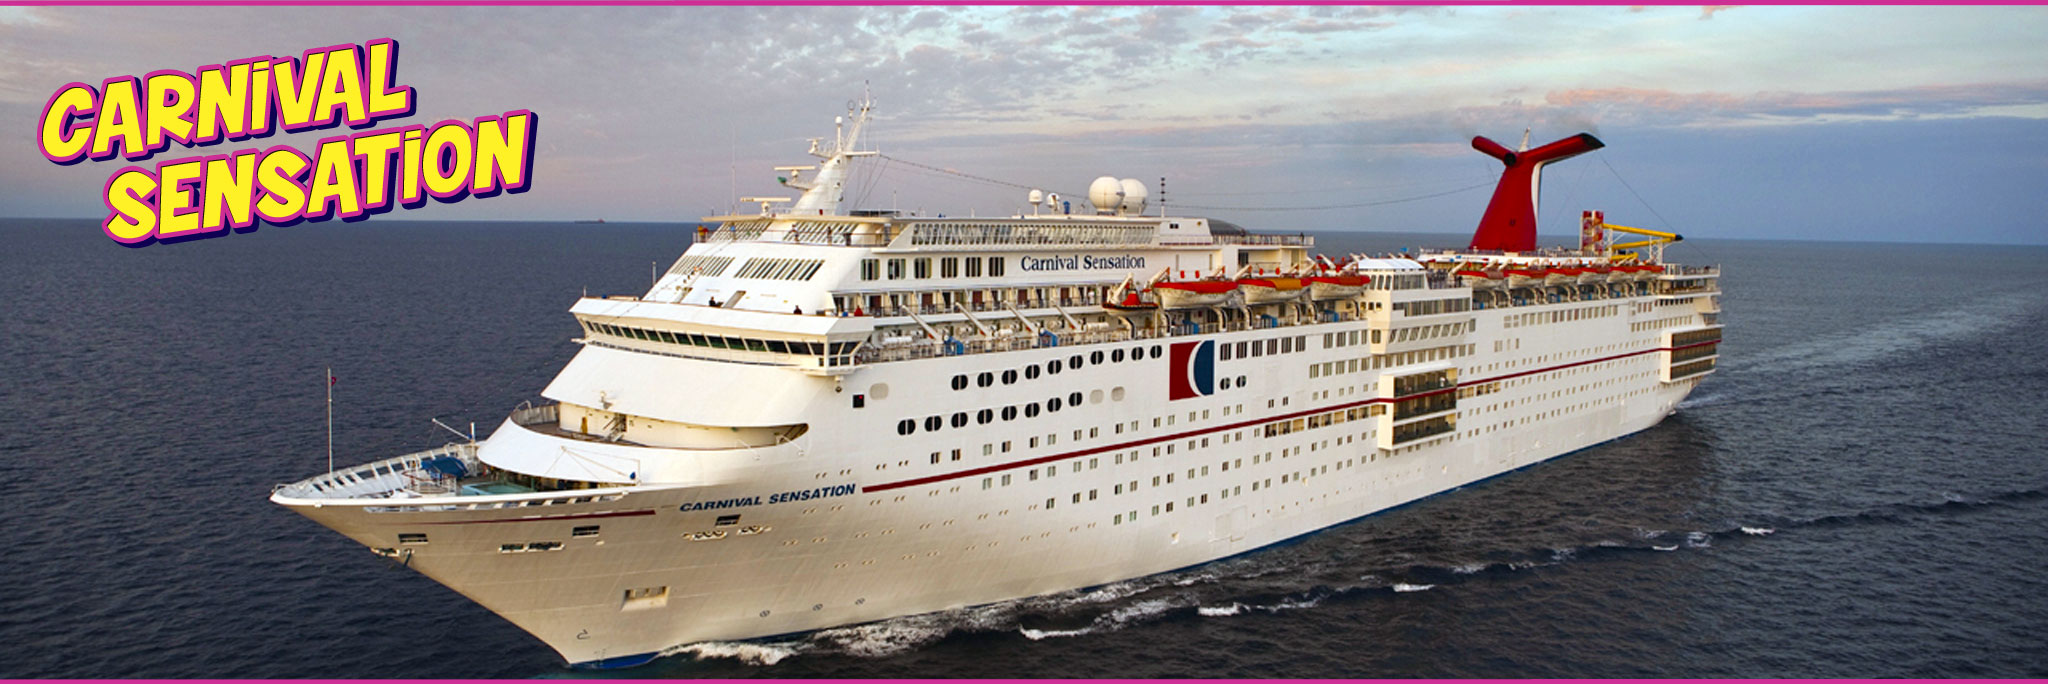 Enjoy A Cruise With The Most Iconic Names Of 90s Hip Hop LATF USA